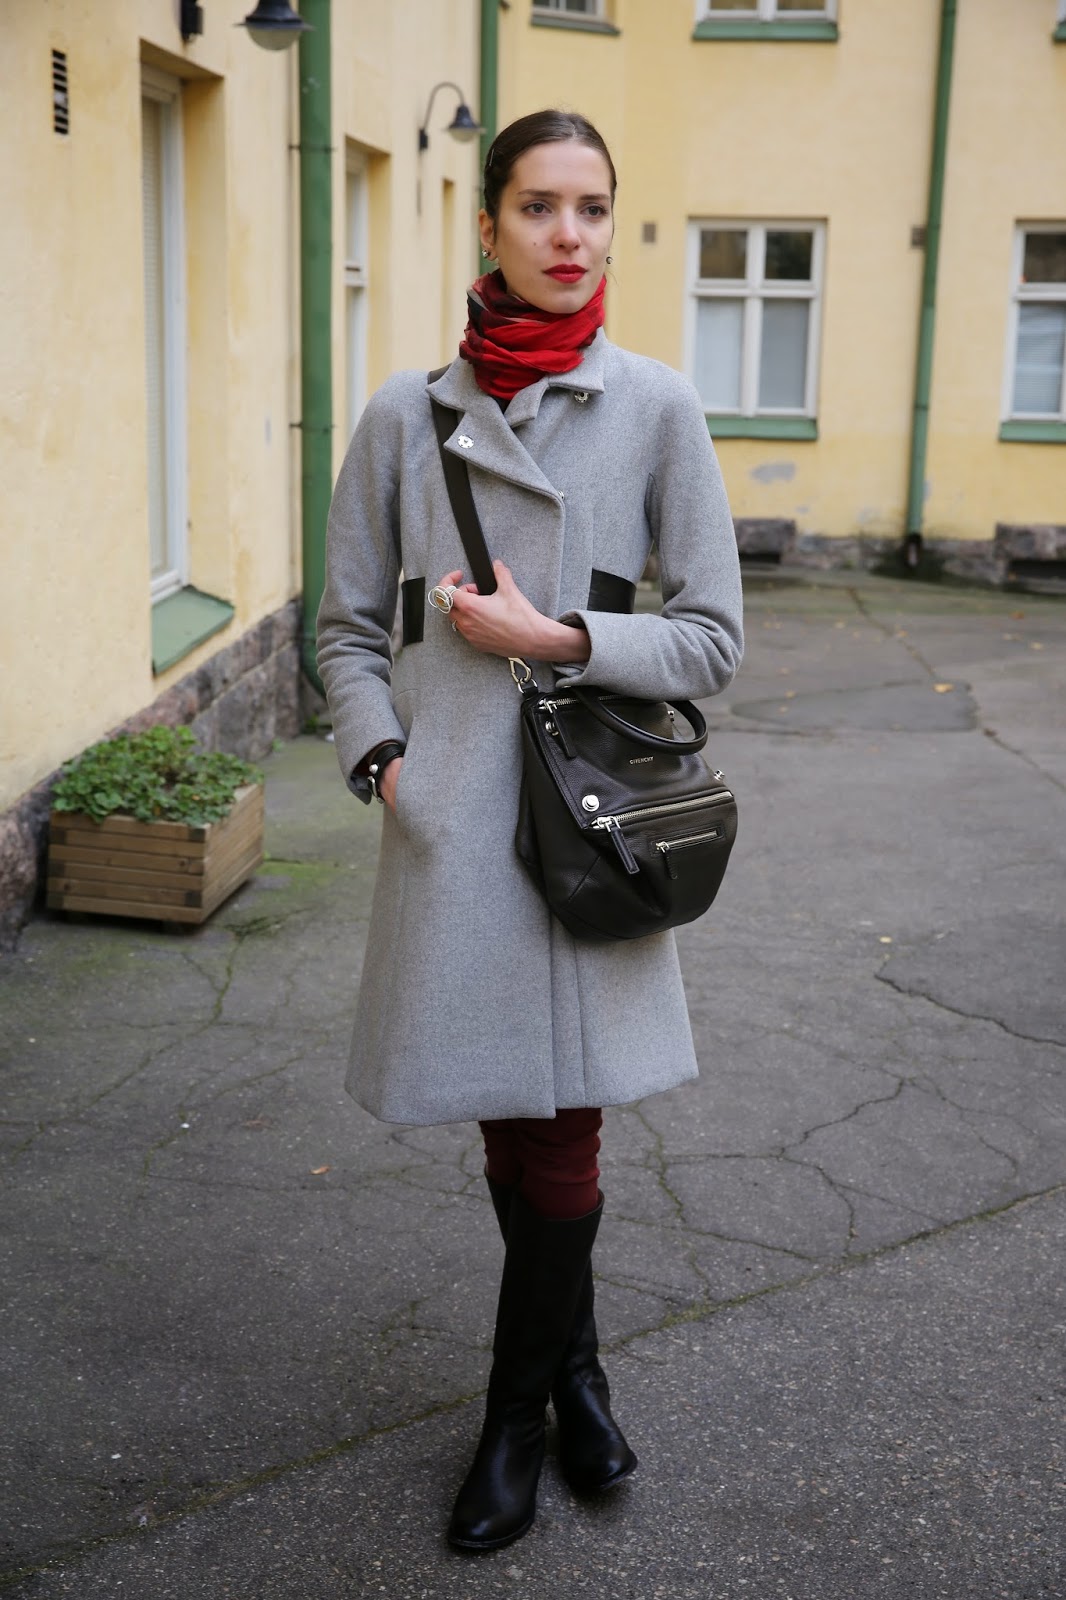 Outfit post - Layers - L'ART OF FASHIONL'ART OF FASHION